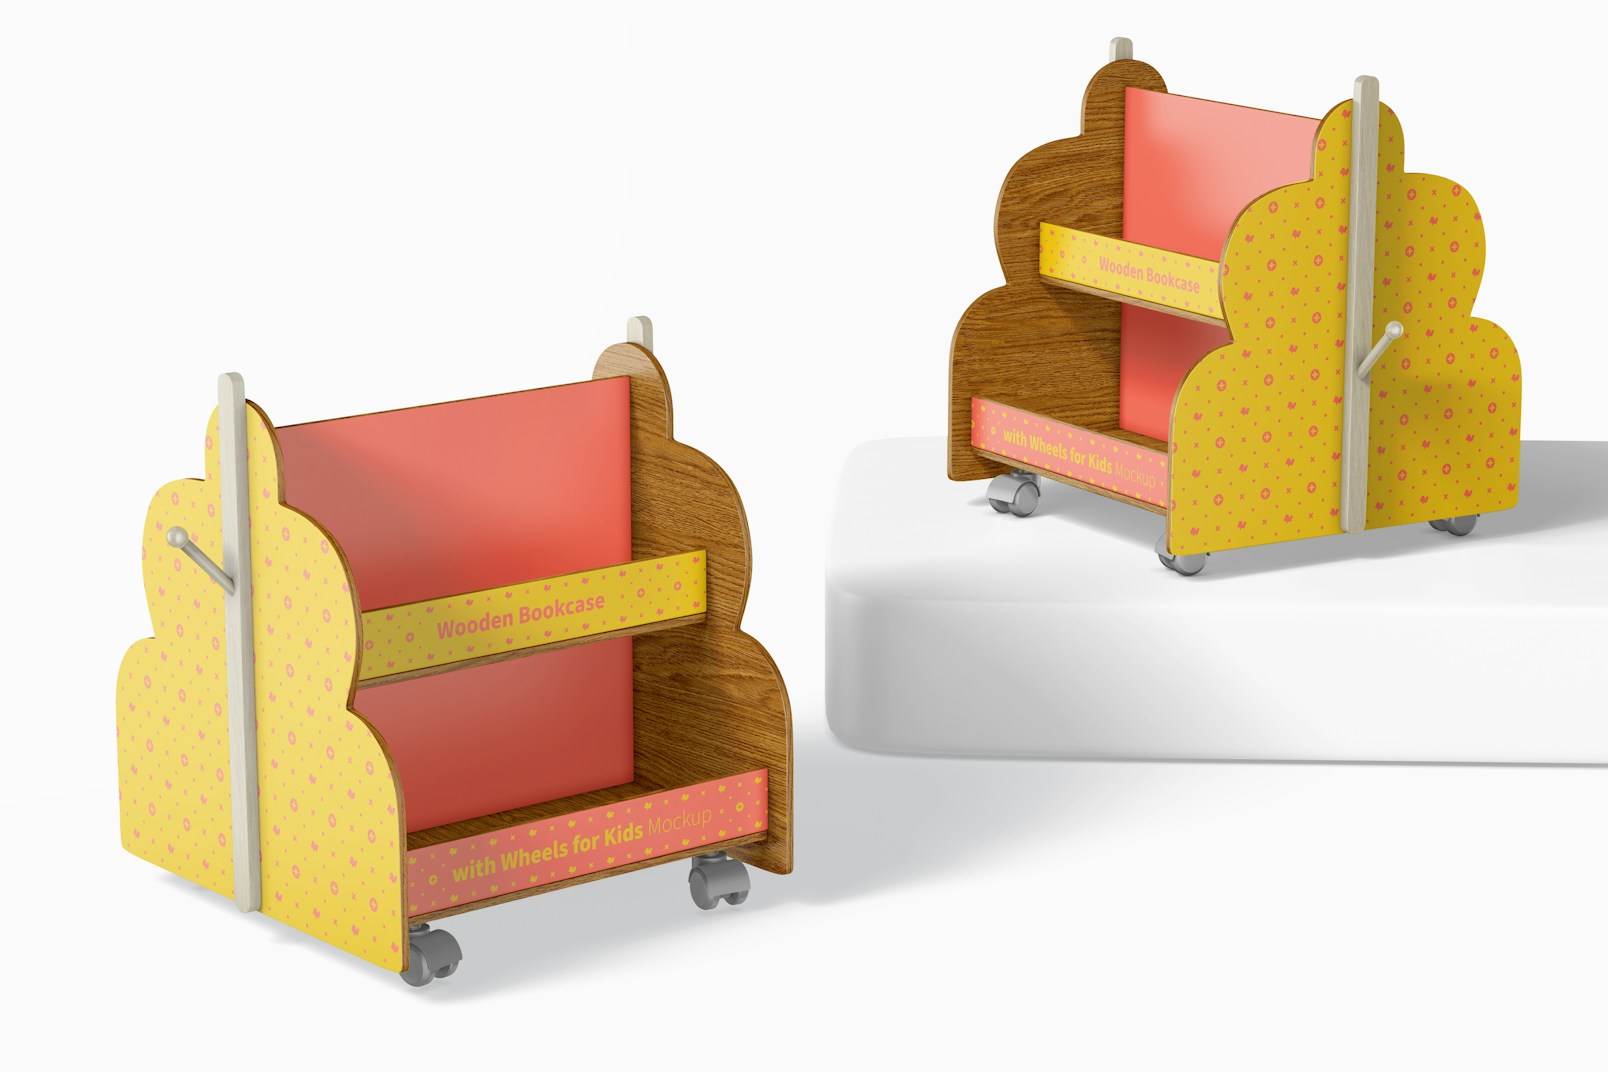 Wooden Bookcases with Wheels for Kids Mockup, Perspective